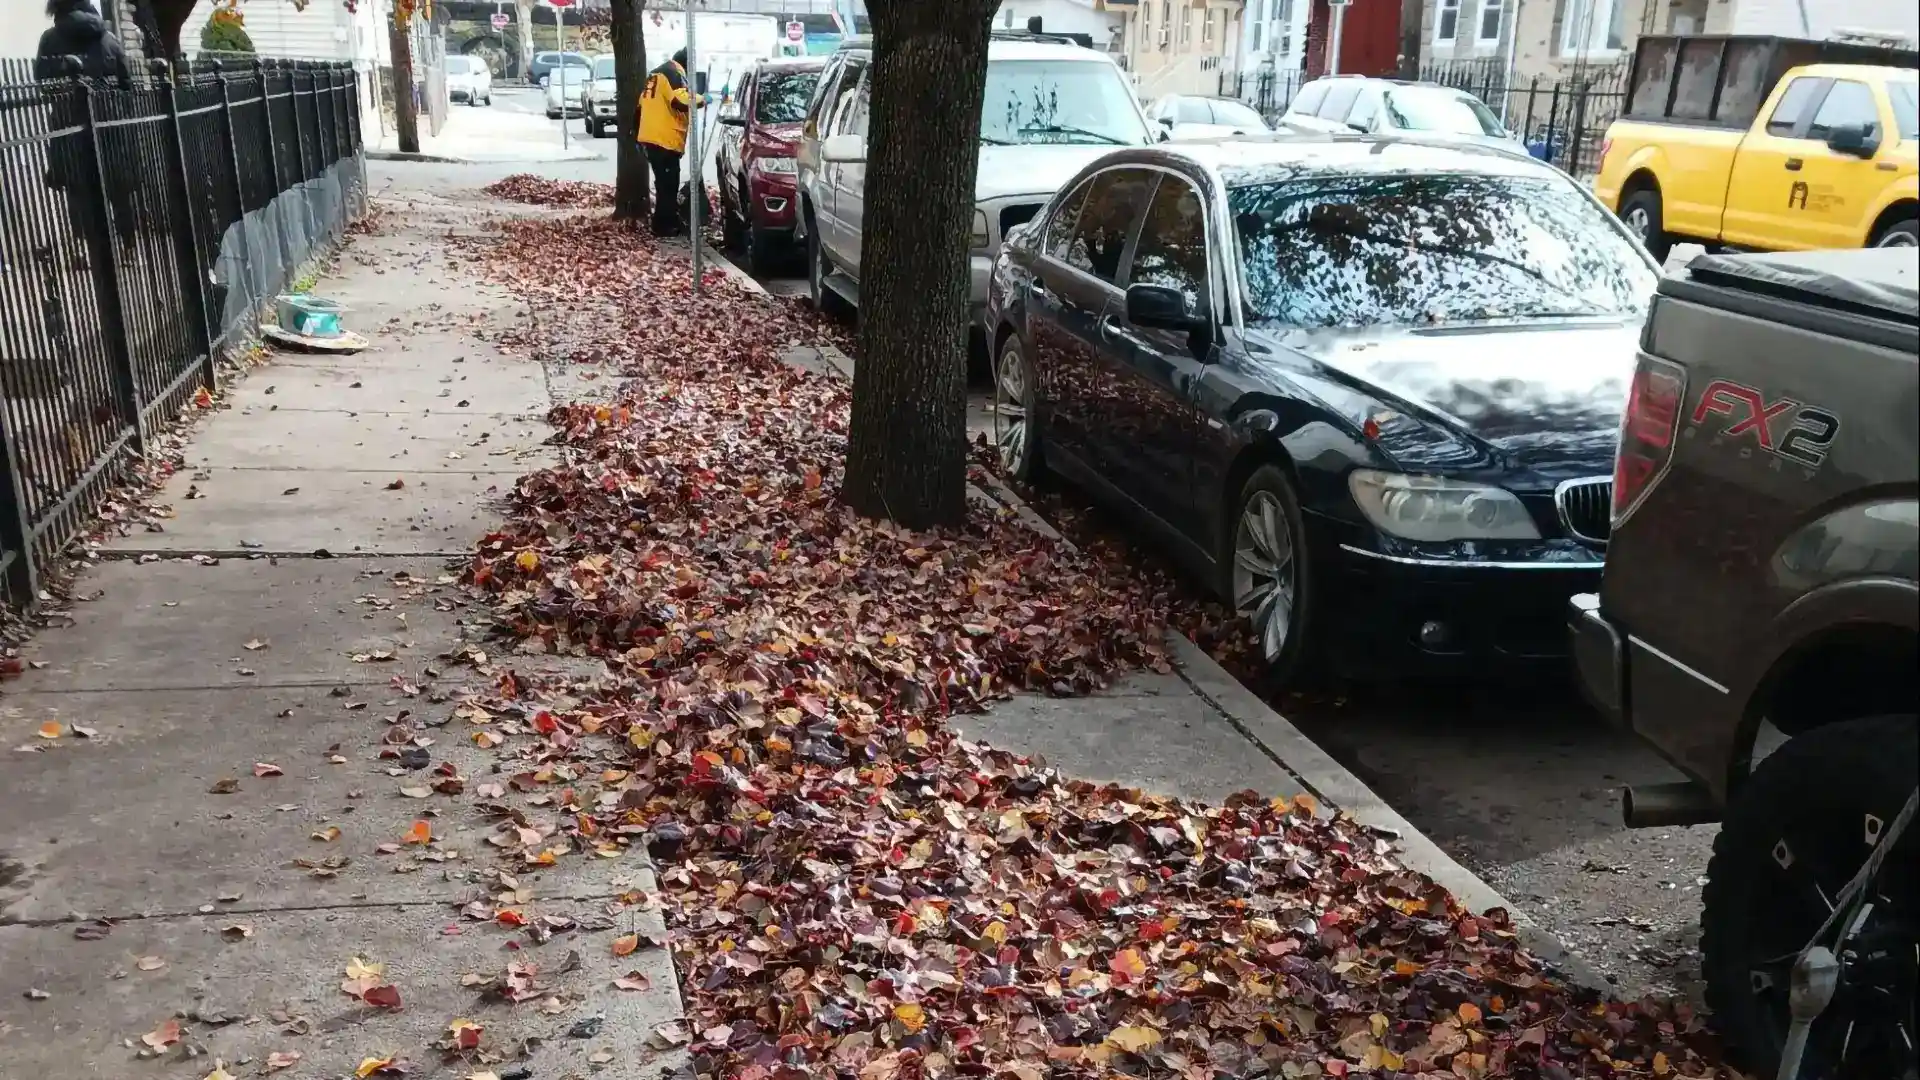 A pile of leaves covering the sidewalk.